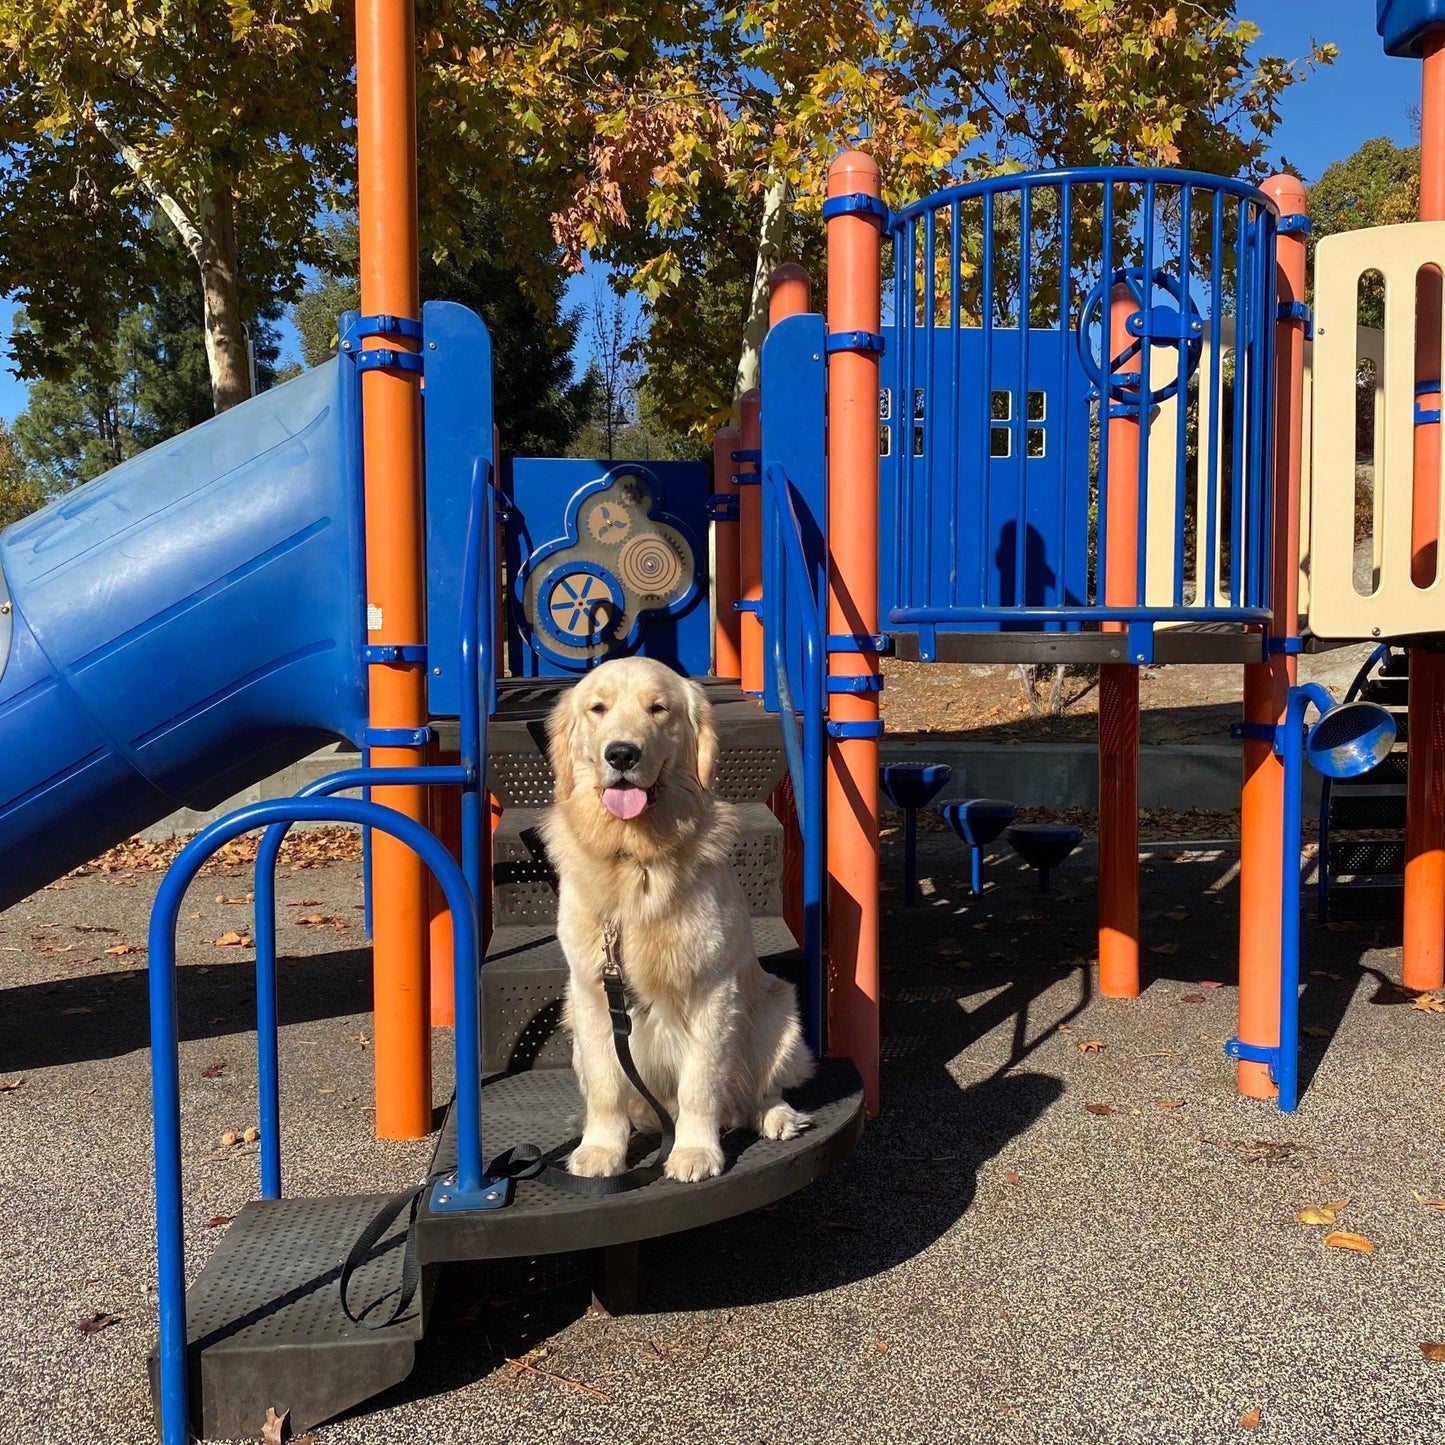 a photo of a golden retriever sitting on a playground structure